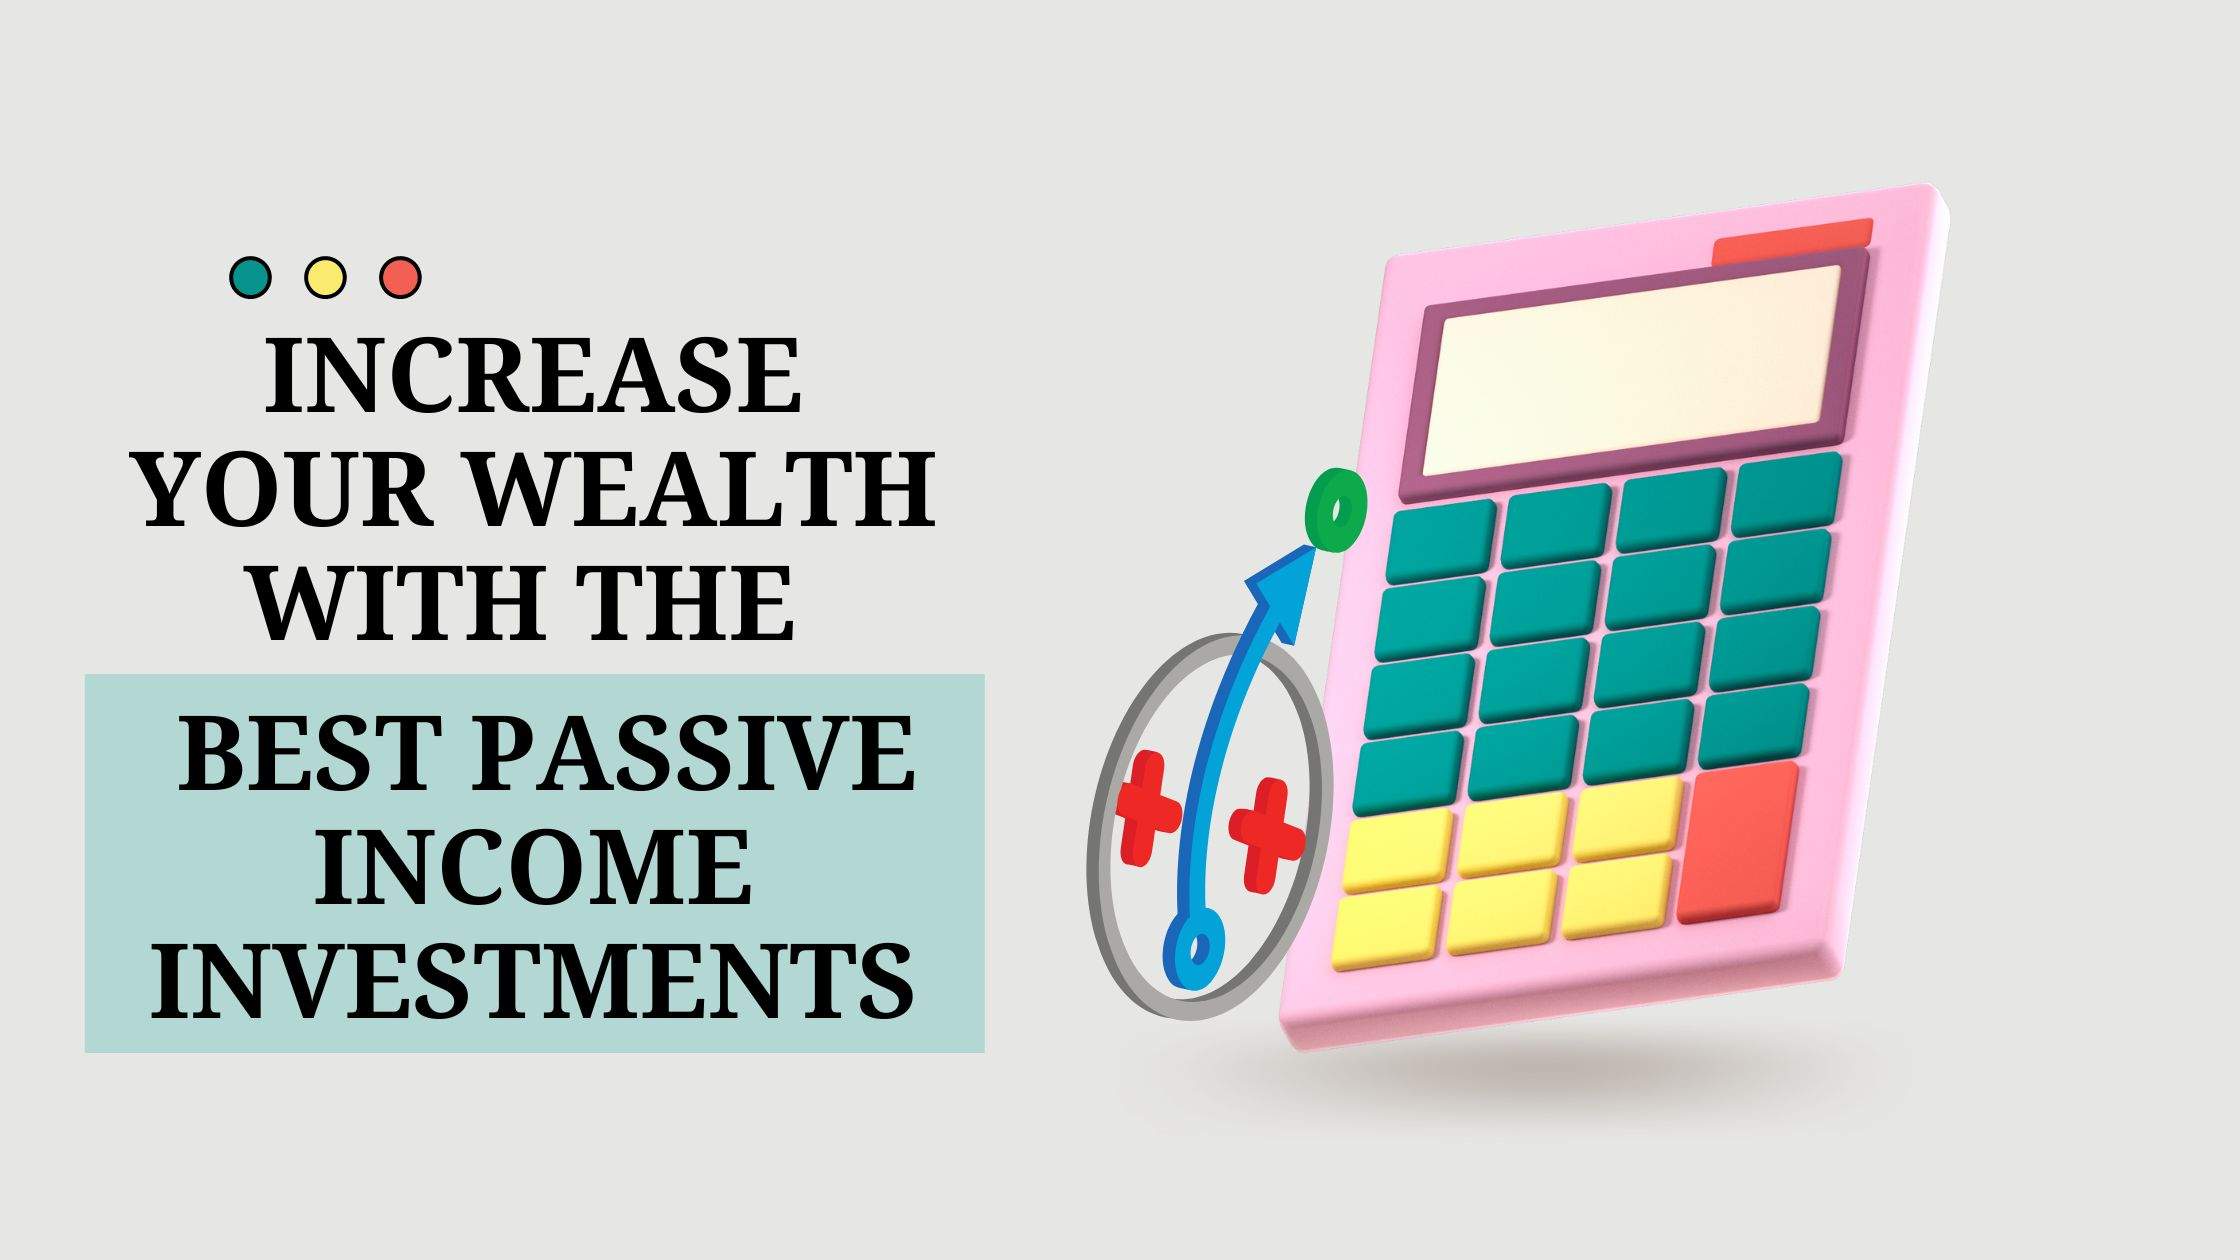 Know how to Increase Your Wealth With the Best Passive Income Investments